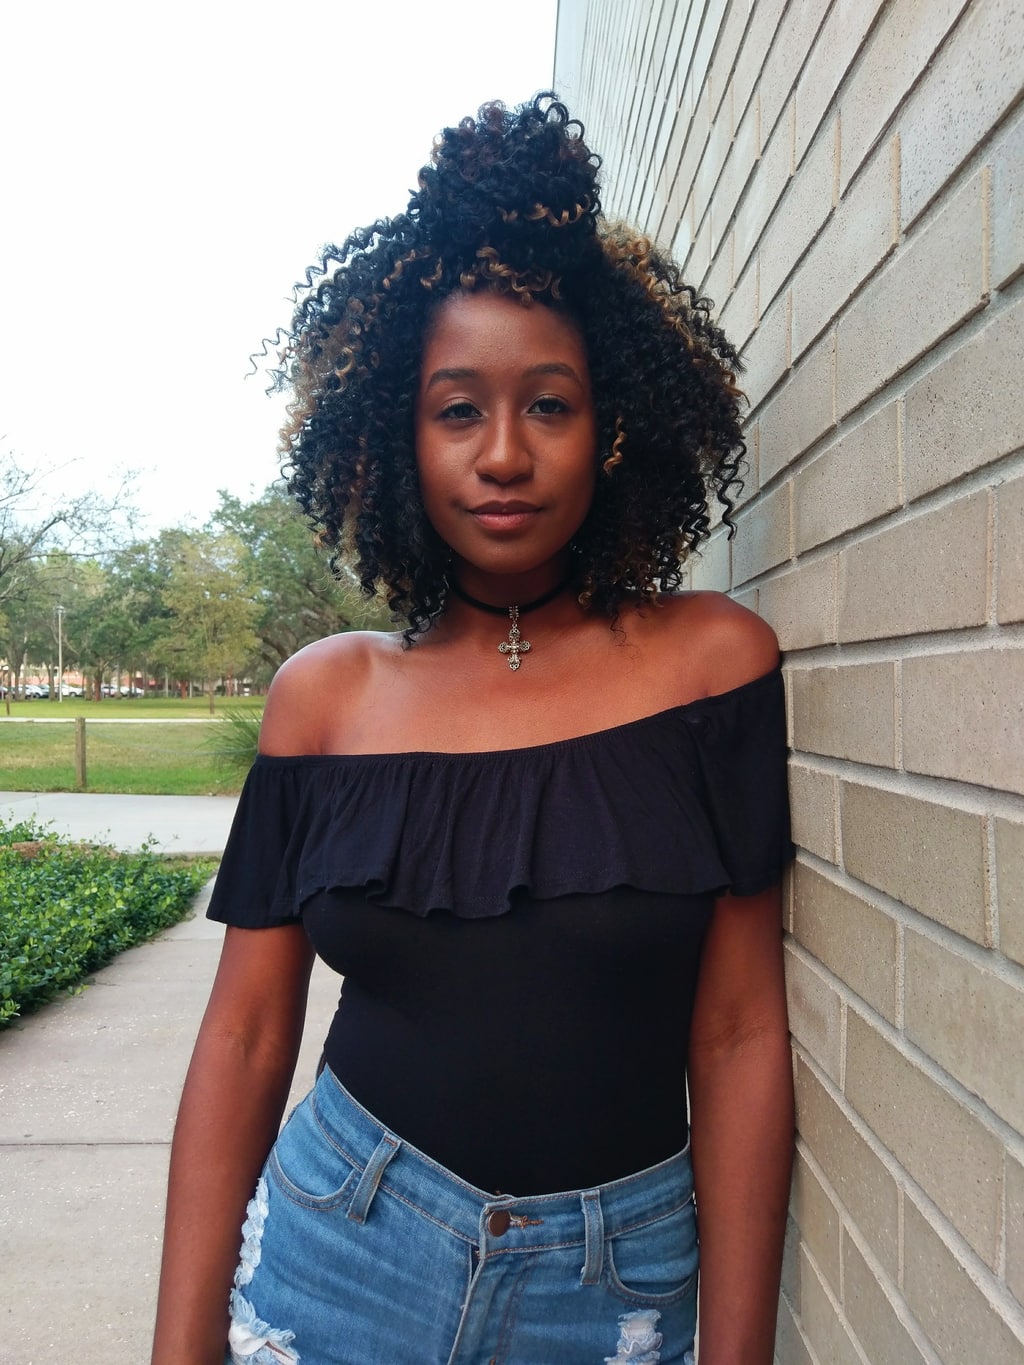 Payton wears an off-the-shoulder black ruffled bodysuit with cross choker necklace and a pair of light-wash denim jeans.